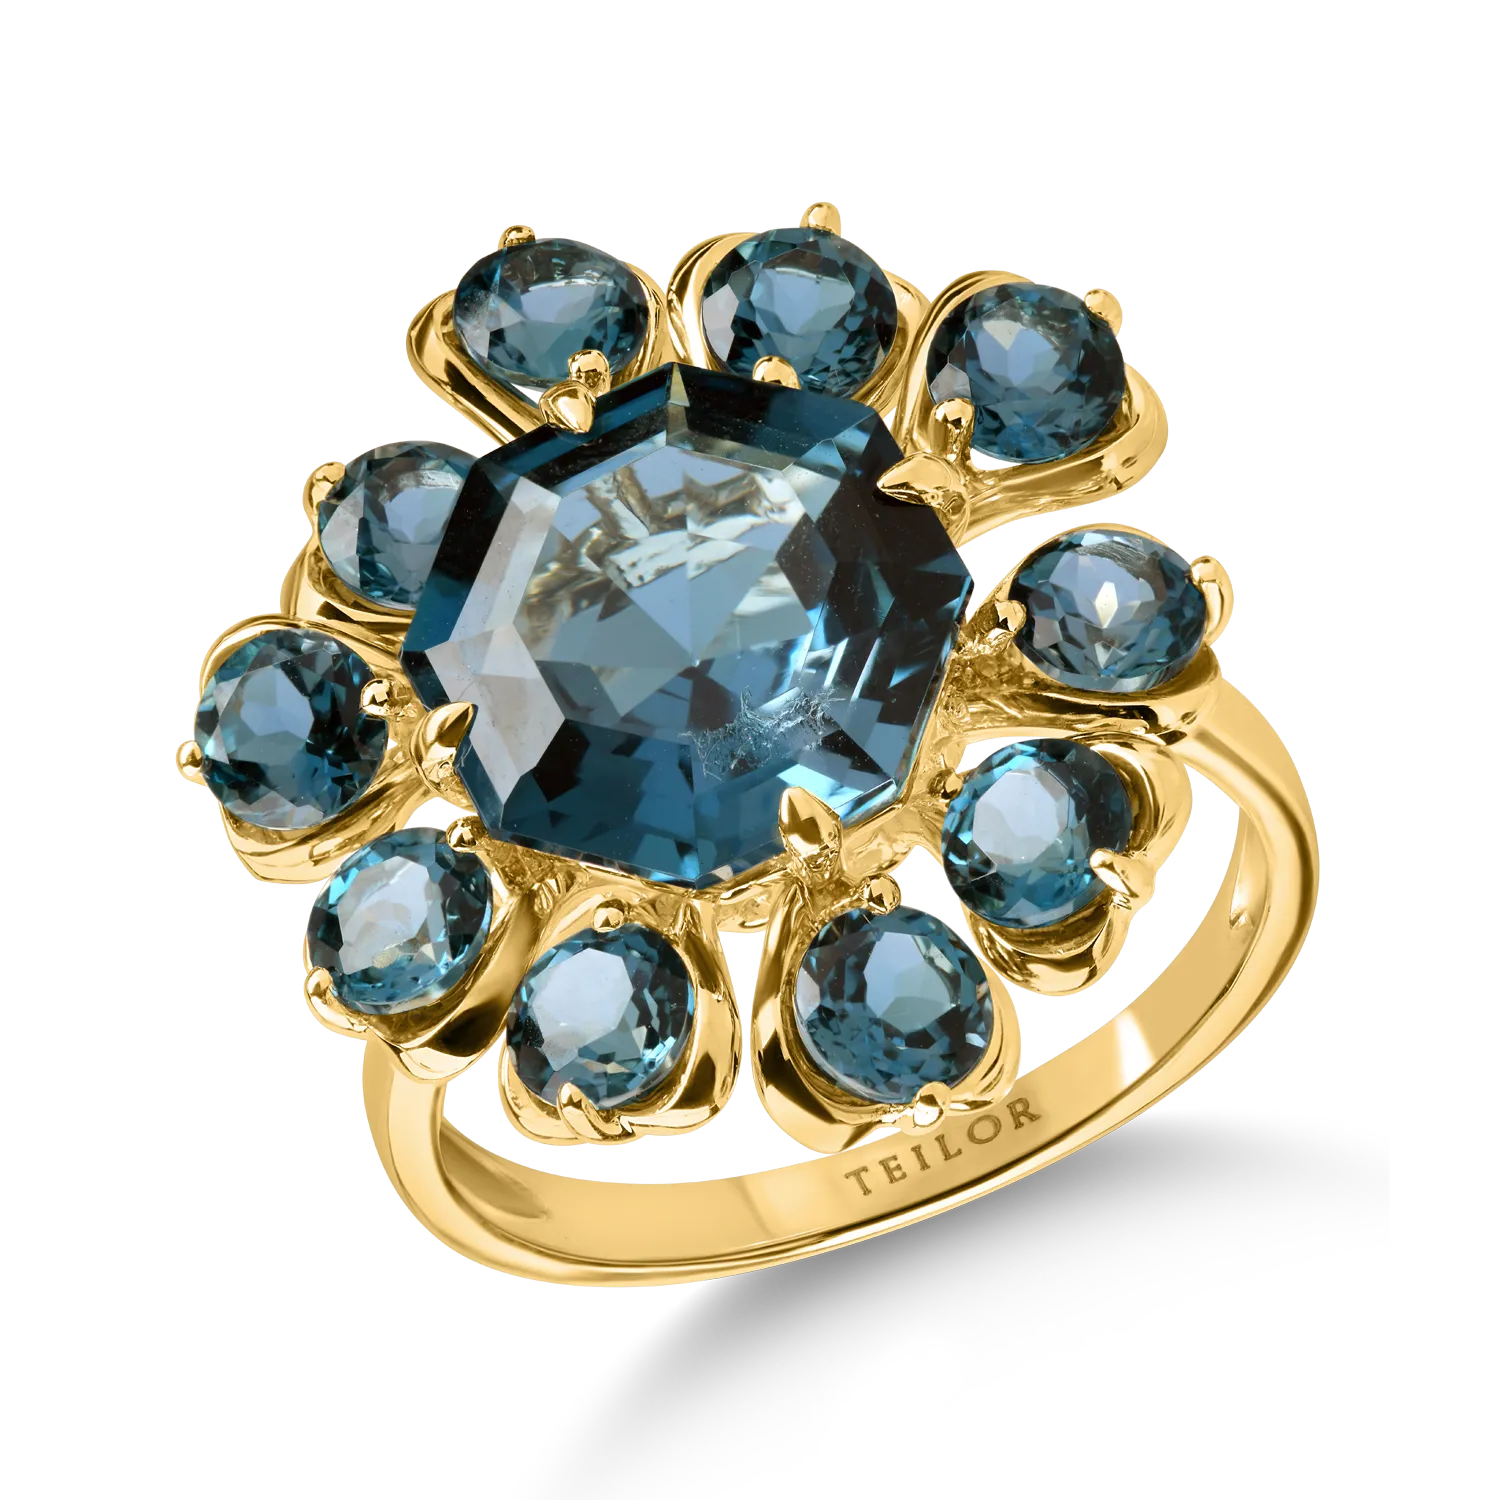 Yellow gold ring with 9.2ct london blue topazes